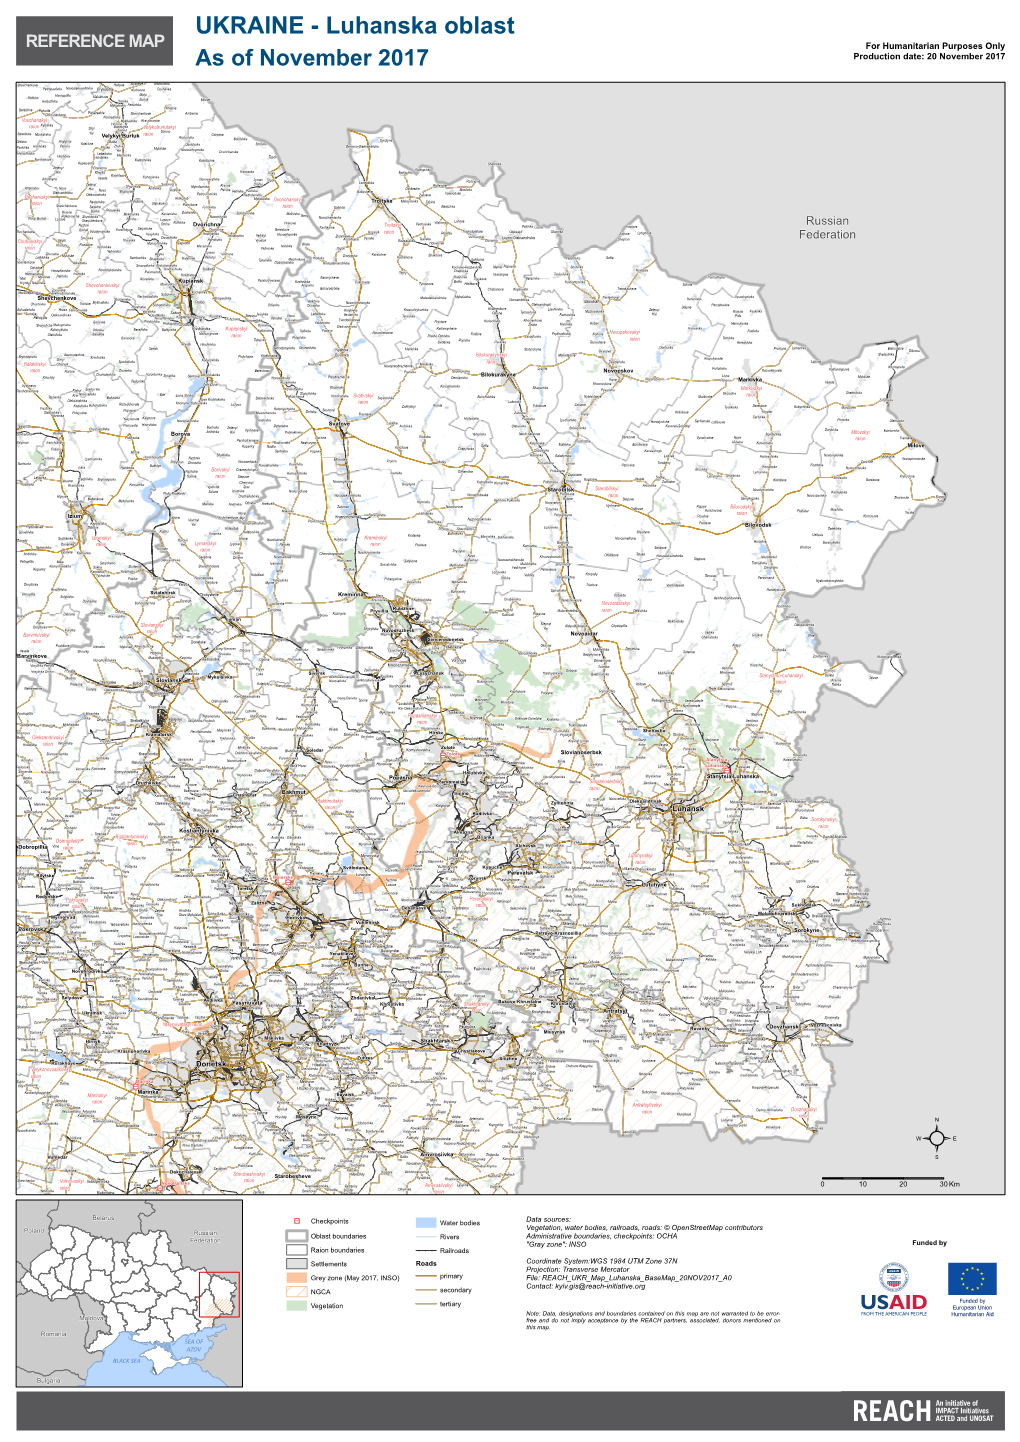 Luhanska Oblast REFERENCE MAP for Humanitarian Purposes Only As of November 2017 Production Date: 20 November 2017